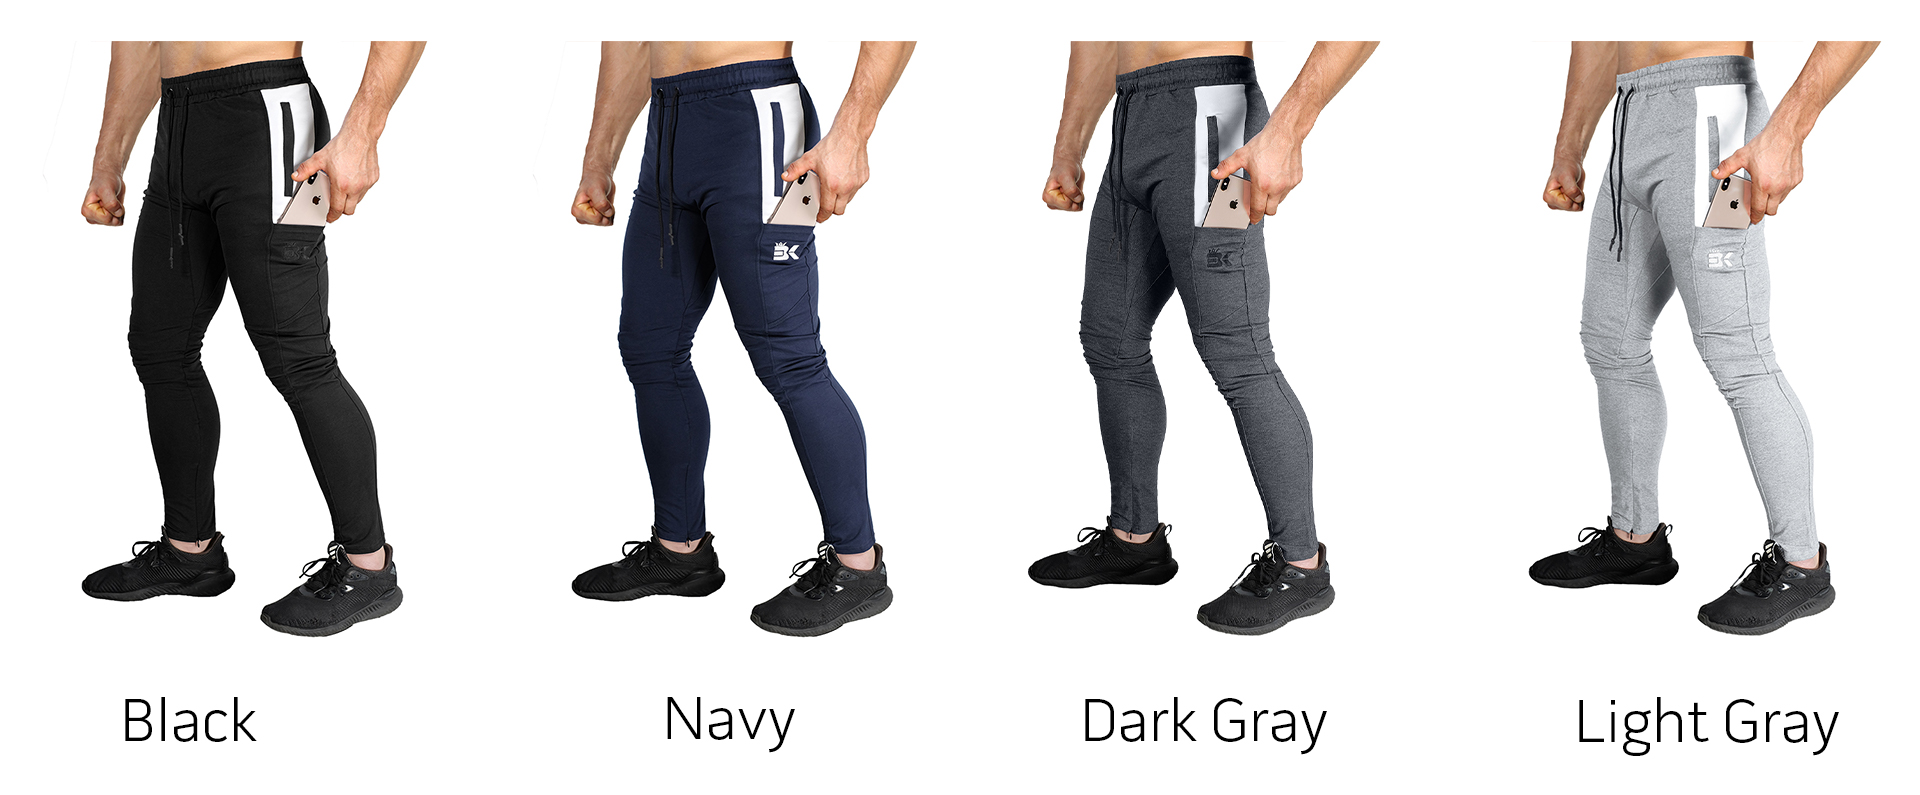 BROKIG Mens Cargo Workout Joggers Pants Tapered Gym India